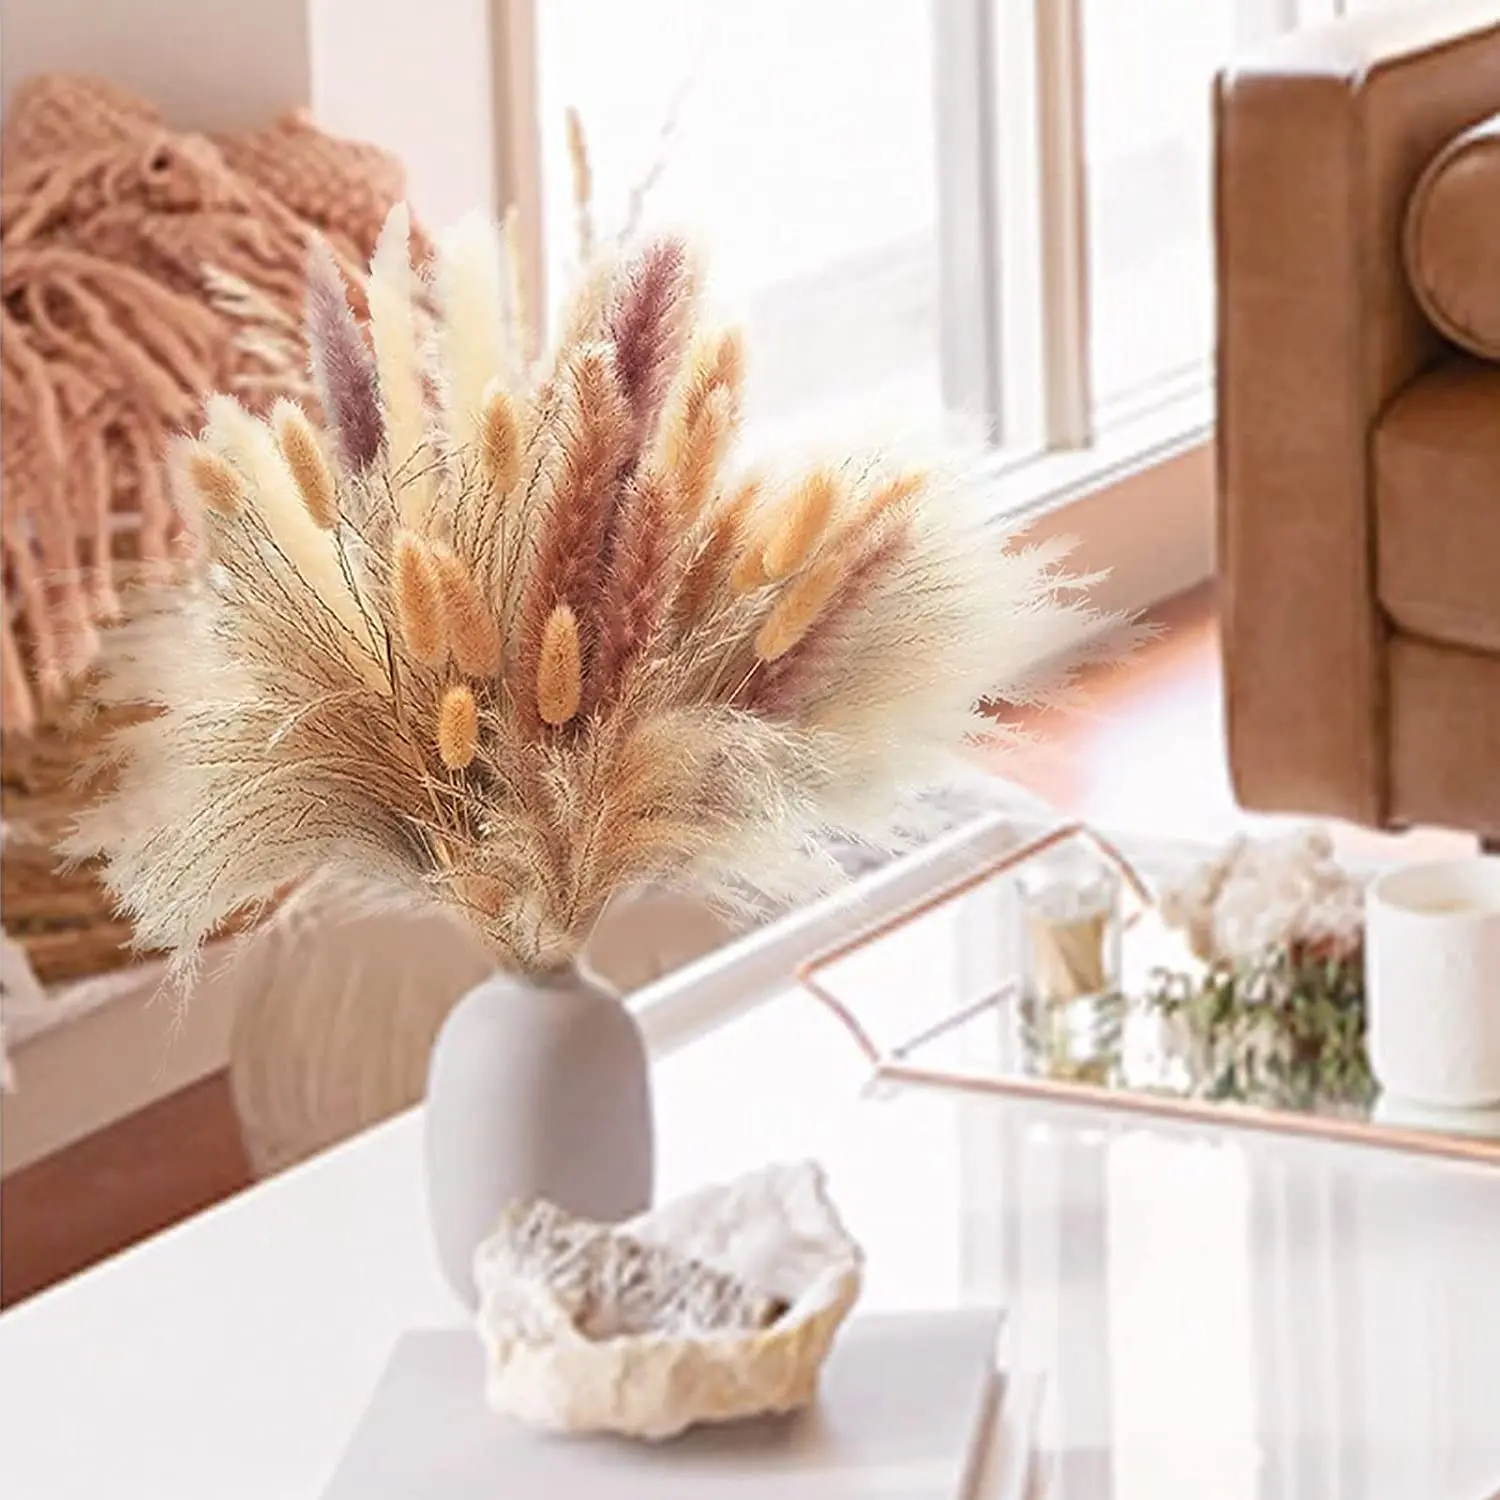 

100 PCS Dried Pampas Grass ,Contains Bunny Tails Dried Flowers,Reed Grass Bouquet for Wedding Boho Flowers Home Table Decor